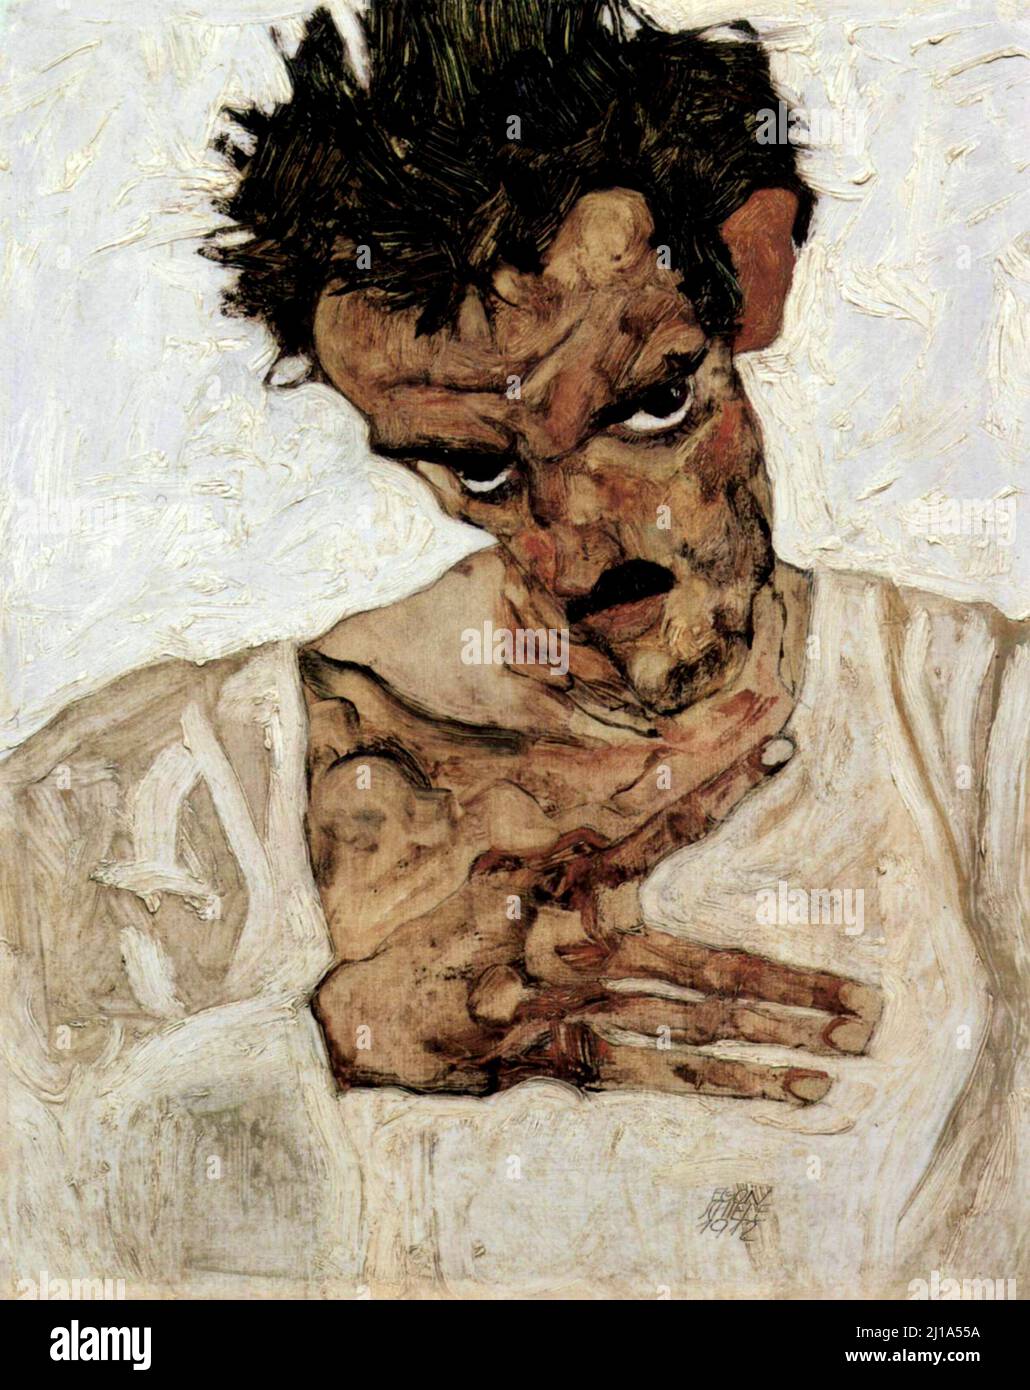 Egon Schiele - Self Portrait with Bowed Head and unusual splayed finger gesture - 1912 Stock Photo